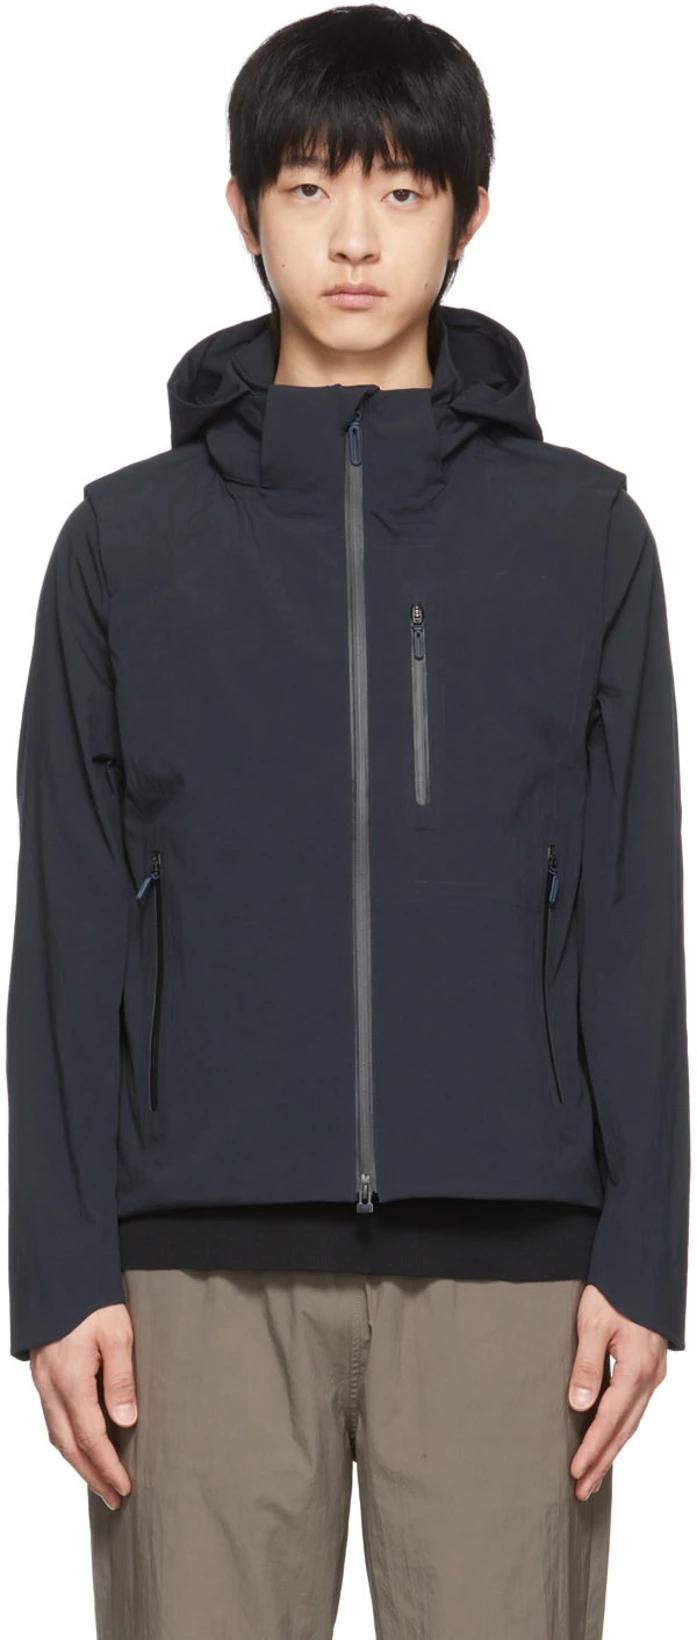 Navy Polyester Jacket by DESCENTE A LL TE RR AI N